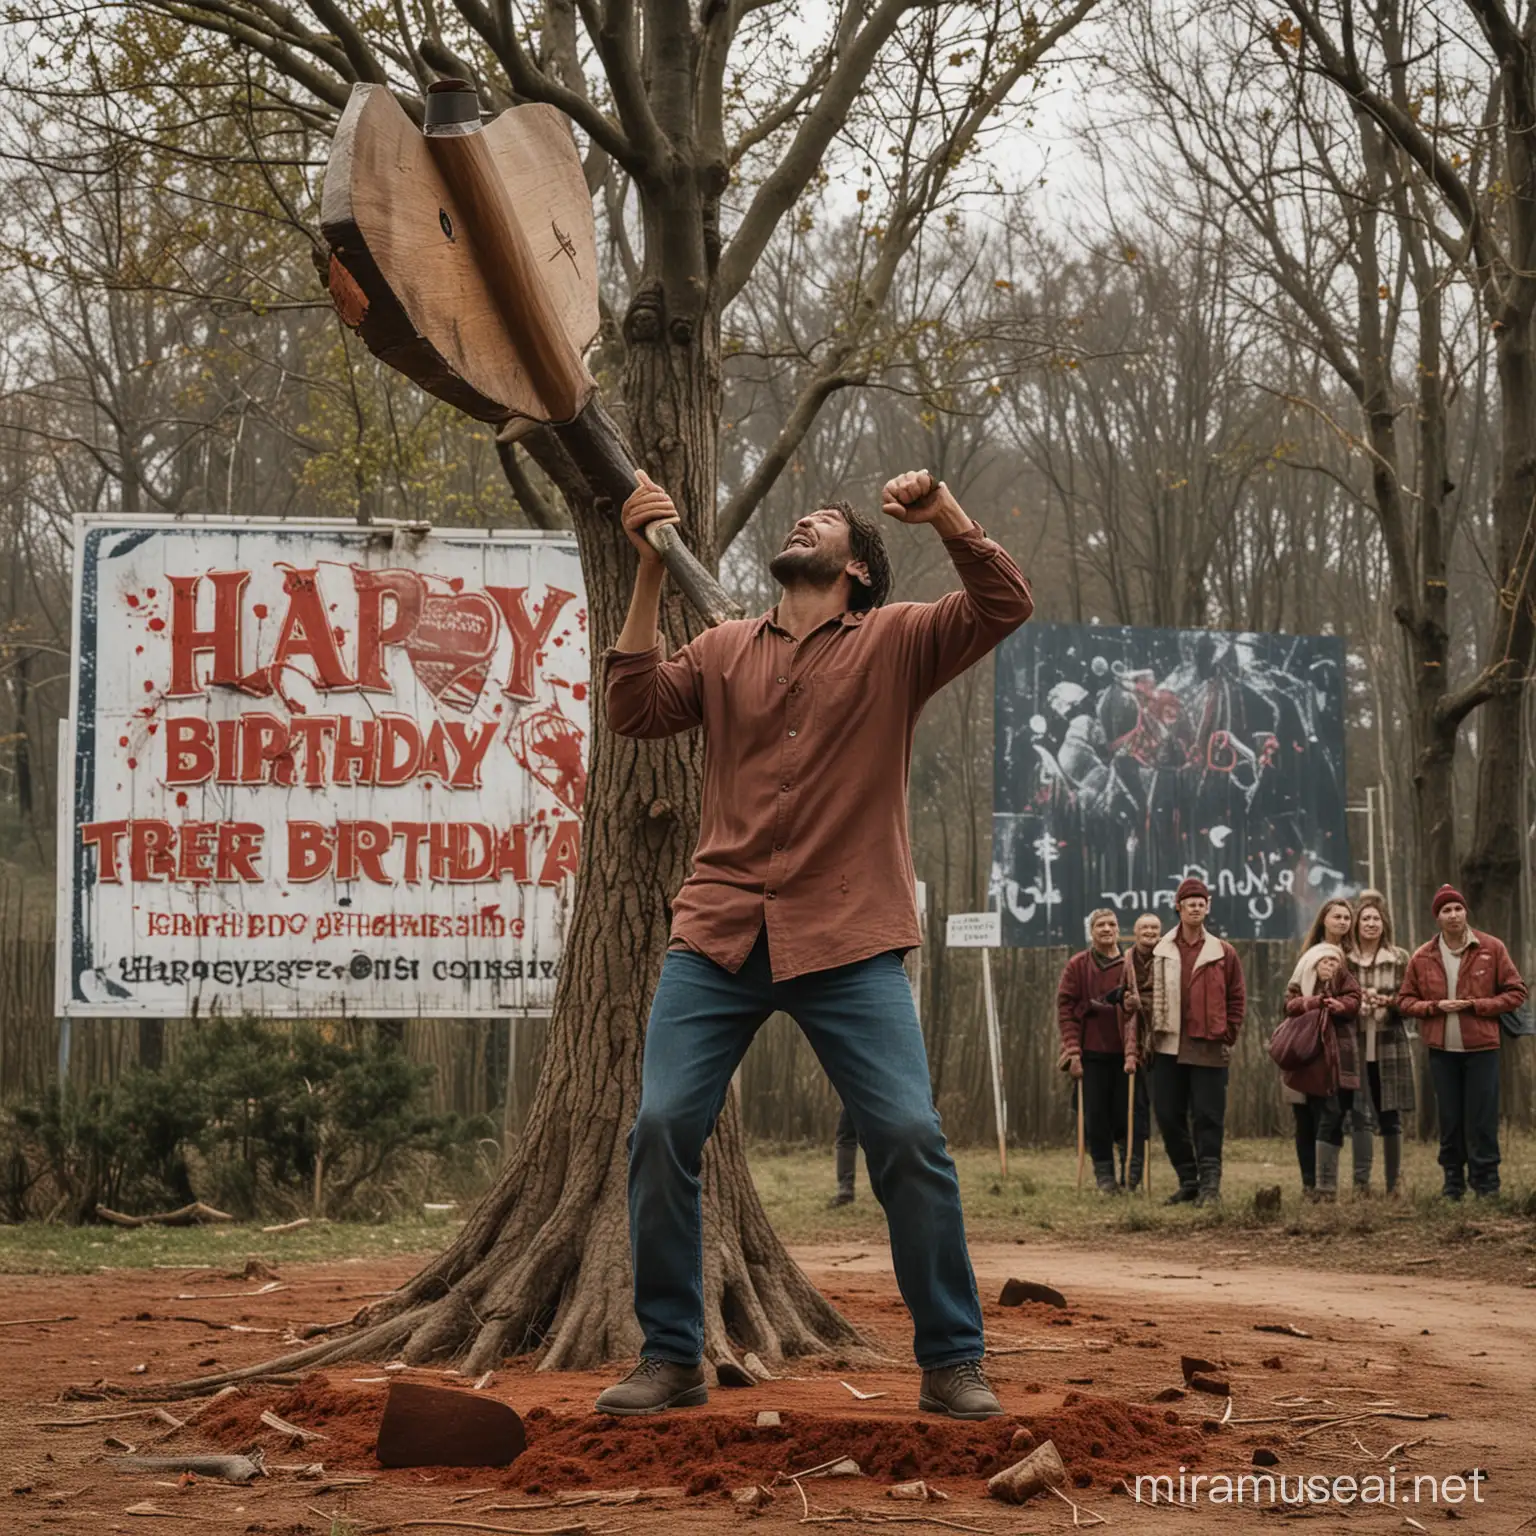 a man standing in the center of the universe cutting the tree with large axe .Tree is made of energy and when the axe is hitting the tree the blood starts coming out. in the background there is a billboard that says HAPPY BIRTHDAY MAGISTRE